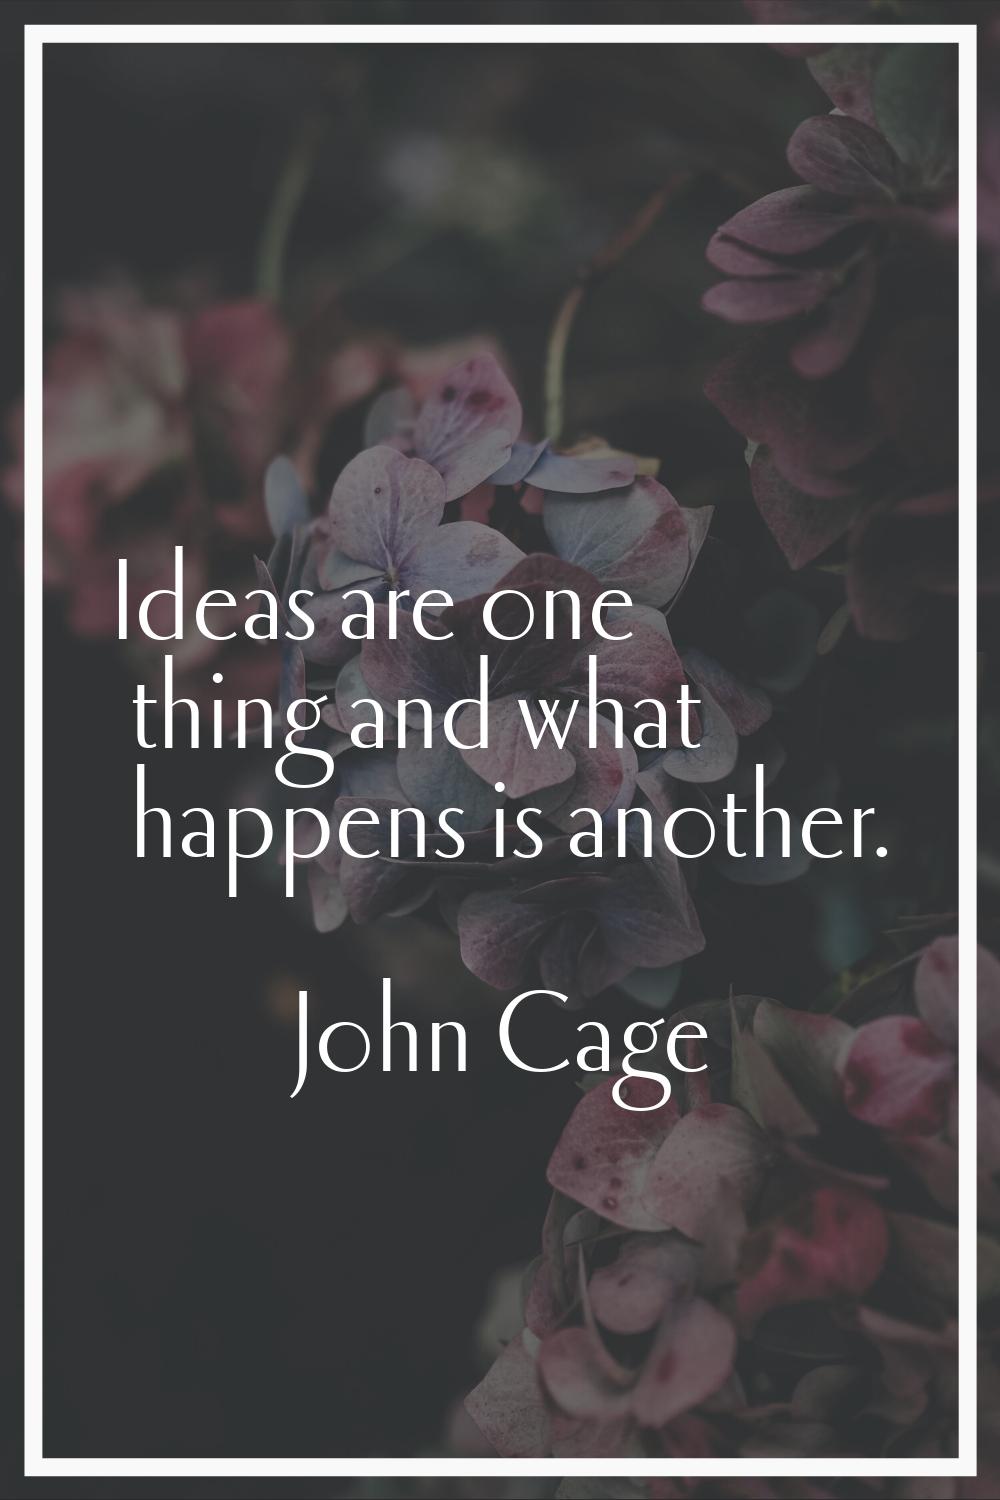 Ideas are one thing and what happens is another.